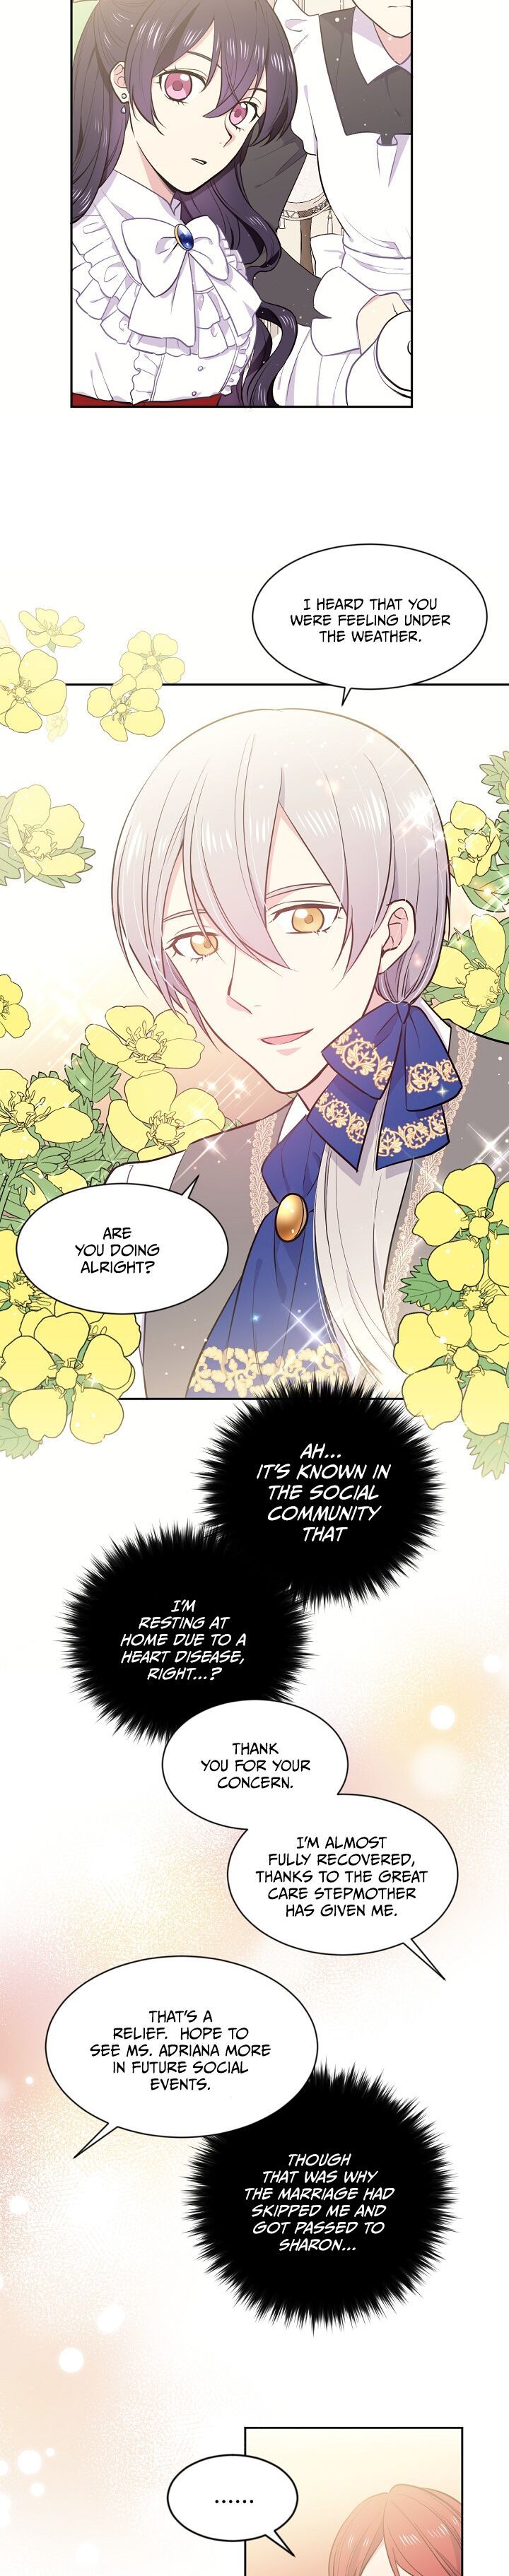 The Goal Is to Become a Gold Spoon So I Need to Be Completely Invulnerable Chapter 002 page 12